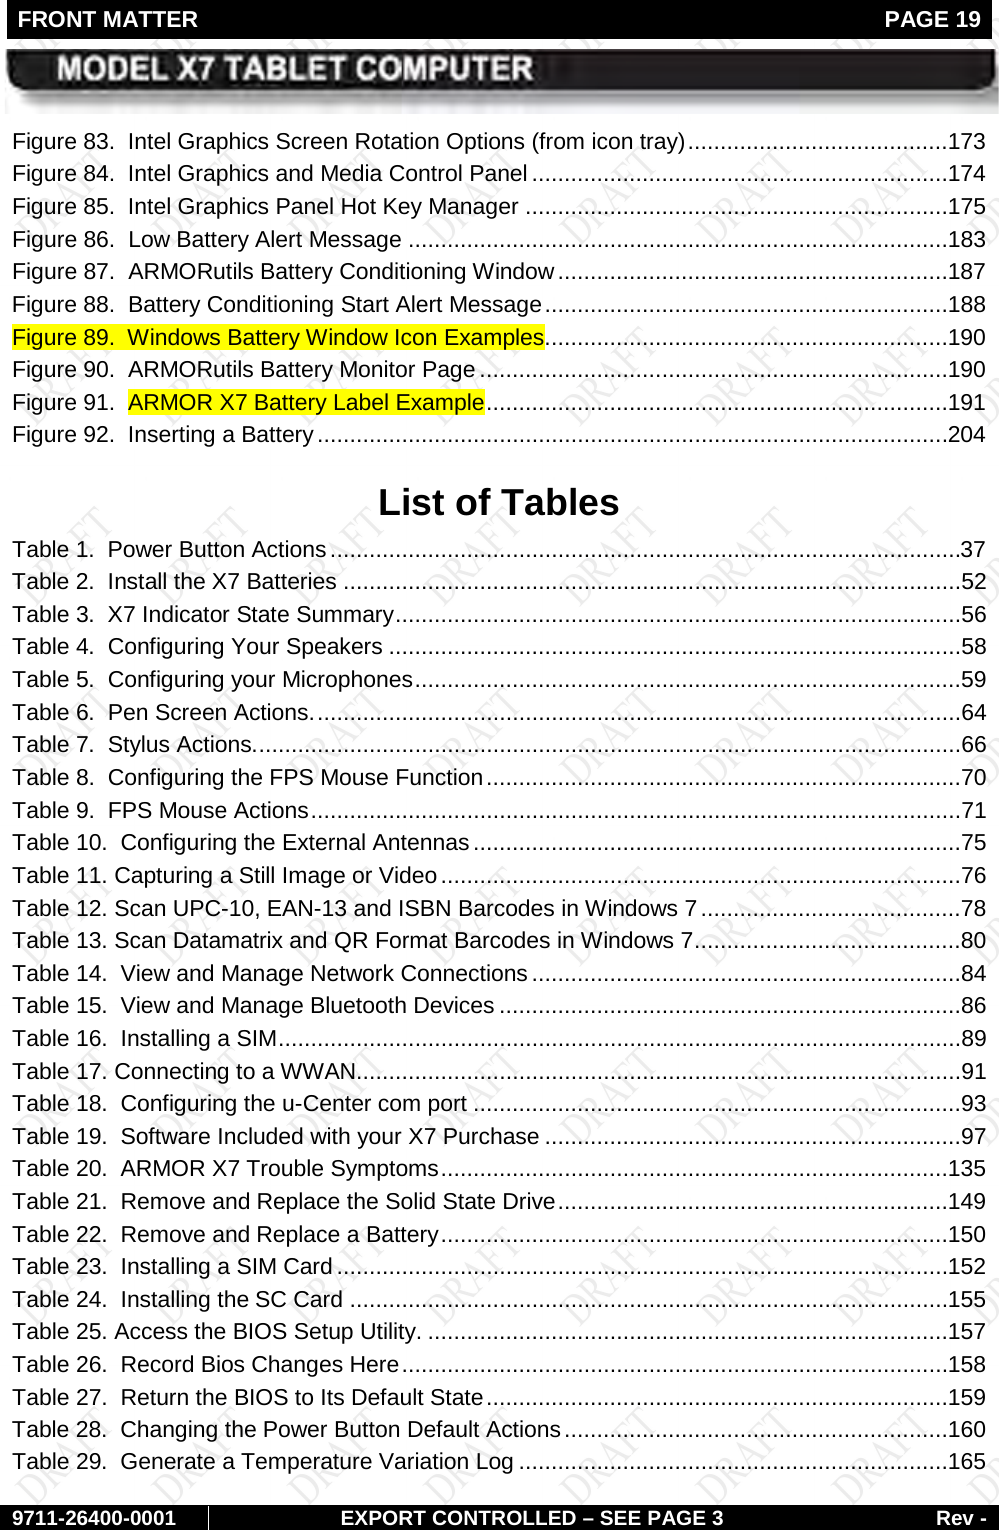 FRONT MATTER   PAGE 19        9711-26400-0001 EXPORT CONTROLLED – SEE PAGE 3 Rev - Figure 83.  Intel Graphics Screen Rotation Options (from icon tray)   ........................................ 173Figure 84.  Intel Graphics and Media Control Panel   ................................................................ 174Figure 85.  Intel Graphics Panel Hot Key Manager   ................................................................. 175Figure 86.  Low Battery Alert Message   ................................................................................... 183Figure 87.  ARMORutils Battery Conditioning Window   ............................................................ 187Figure 88.  Battery Conditioning Start Alert Message   .............................................................. 188Figure 89.  Windows Battery Window Icon Examples  .............................................................. 190Figure 90.  ARMORutils Battery Monitor Page   ........................................................................ 190Figure 91.  ARMOR X7 Battery Label Example   ....................................................................... 191Figure 92.  Inserting a Battery   ................................................................................................. 204 List of Tables Table 1.  Power Button Actions   .................................................................................................37Table 2.  Install the X7 Batteries   ...............................................................................................52Table 3.  X7 Indicator State Summary   .......................................................................................56Table 4.  Configuring Your Speakers   ........................................................................................58Table 5.  Configuring your Microphones   ....................................................................................59Table 6.  Pen Screen Actions.   ...................................................................................................64Table 7.  Stylus Actions.   ............................................................................................................66Table 8.  Configuring the FPS Mouse Function   .........................................................................70Table 9.  FPS Mouse Actions   ....................................................................................................71Table 10.  Configuring the External Antennas   ...........................................................................75Table 11. Capturing a Still Image or Video   ................................................................................76Table 12. Scan UPC-10, EAN-13 and ISBN Barcodes in Windows 7   ........................................78Table 13. Scan Datamatrix and QR Format Barcodes in Windows 7   .........................................80Table 14.  View and Manage Network Connections   ..................................................................84Table 15.  View and Manage Bluetooth Devices   .......................................................................86Table 16.  Installing a SIM   .........................................................................................................89Table 17. Connecting to a WWAN  .............................................................................................91Table 18.  Configuring the u-Center com port   ...........................................................................93Table 19.  Software Included with your X7 Purchase   ................................................................97Table 20.  ARMOR X7 Trouble Symptoms   .............................................................................. 135Table 21.  Remove and Replace the Solid State Drive   ............................................................ 149Table 22.  Remove and Replace a Battery   .............................................................................. 150Table 23.  Installing a SIM Card   .............................................................................................. 152Table 24.  Installing the SC Card   ............................................................................................ 155Table 25. Access the BIOS Setup Utility.   ................................................................................ 157Table 26.  Record Bios Changes Here   .................................................................................... 158Table 27.  Return the BIOS to Its Default State   ....................................................................... 159Table 28.  Changing the Power Button Default Actions   ........................................................... 160Table 29.  Generate a Temperature Variation Log   .................................................................. 165